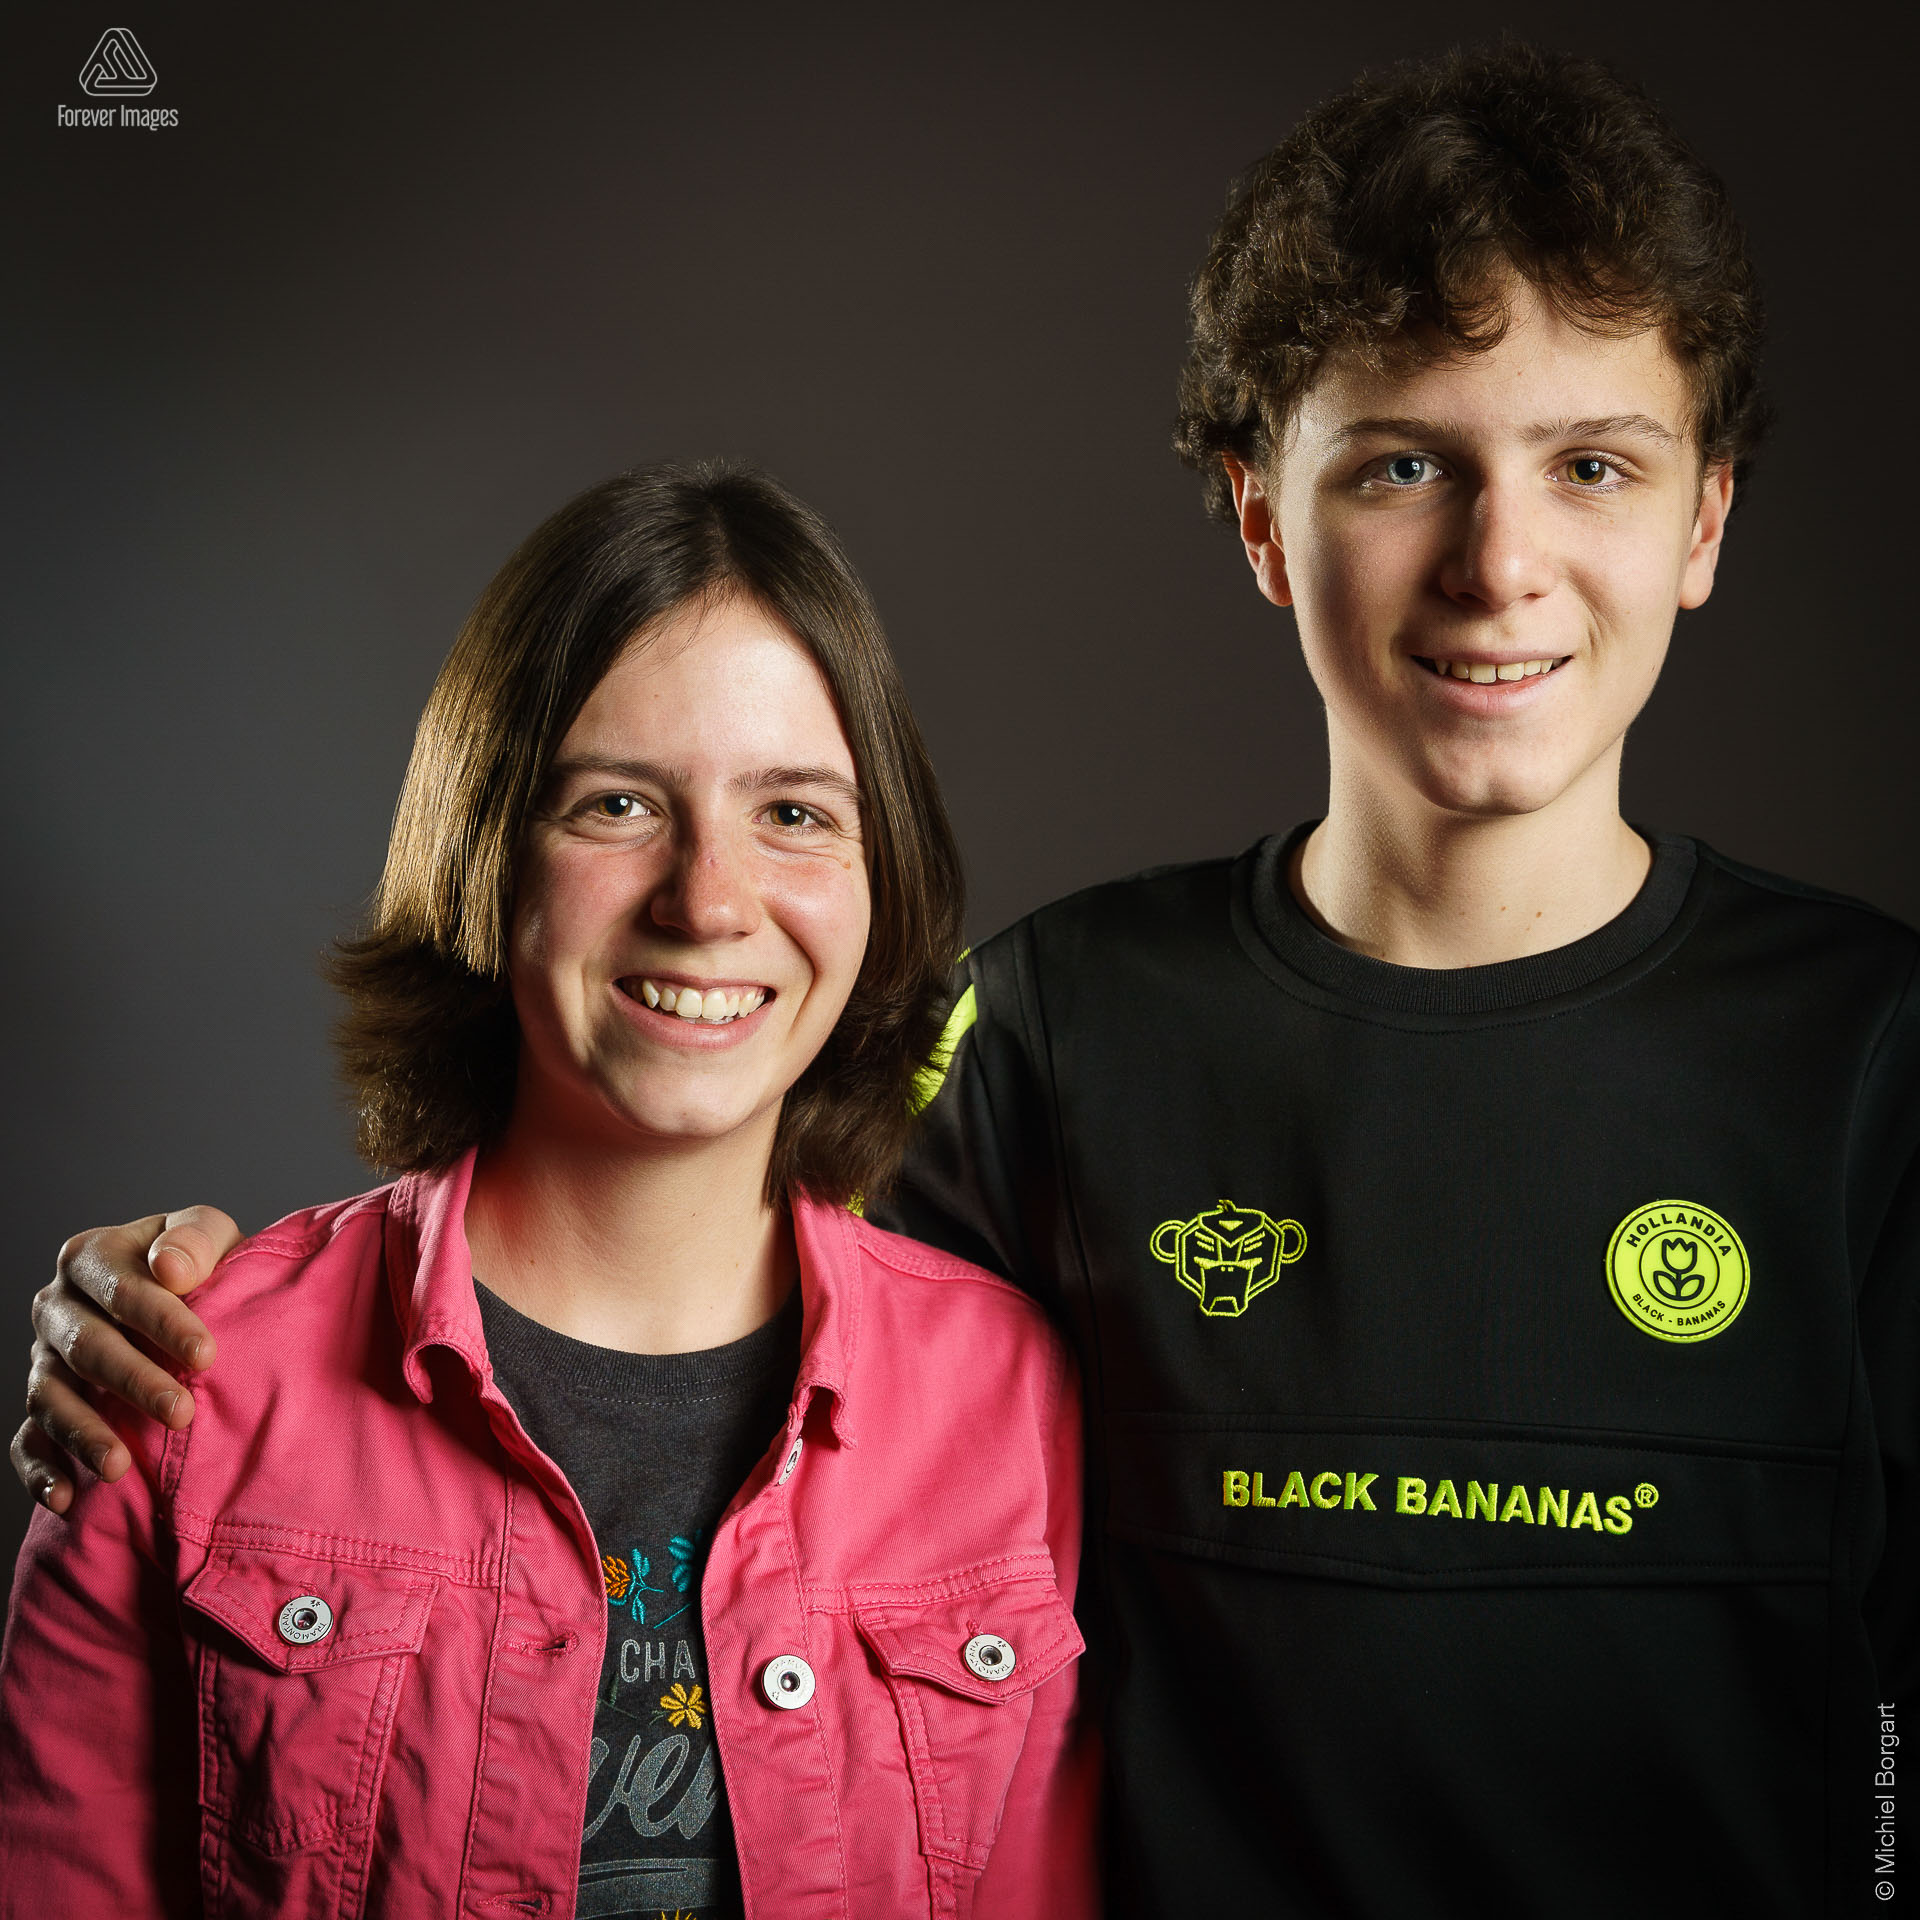 Portrait photo in studio Forever Images brother and sister | Portrait Photographer Michiel Borgart - Forever Images.